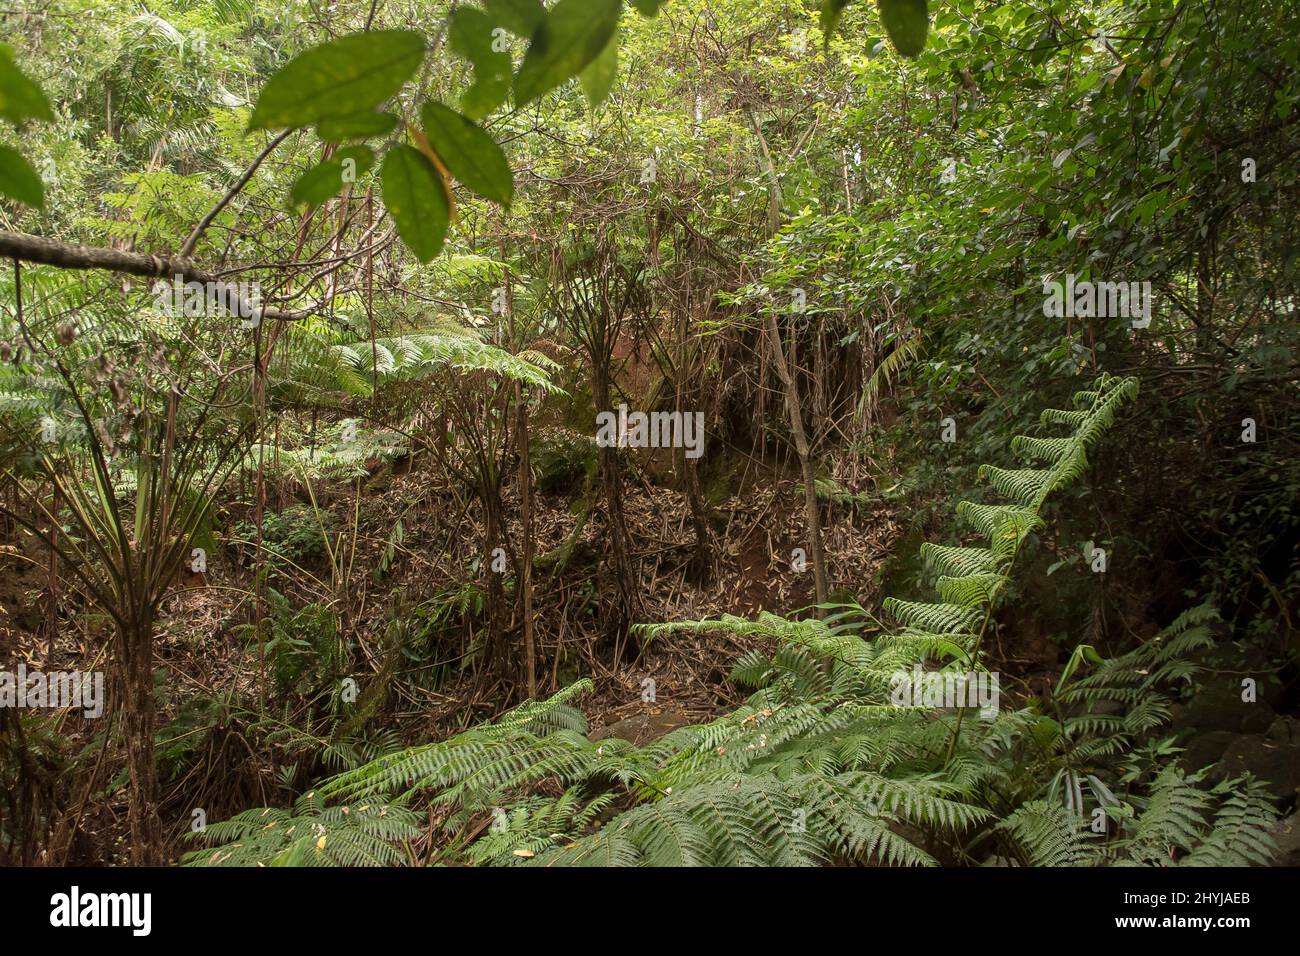 Understorey of dense lowland sub-tropical forest on a rainy summer's day in Queensland, Australia. Tree ferns, Cyathea cooperi, fallen leaves. Stock Photo